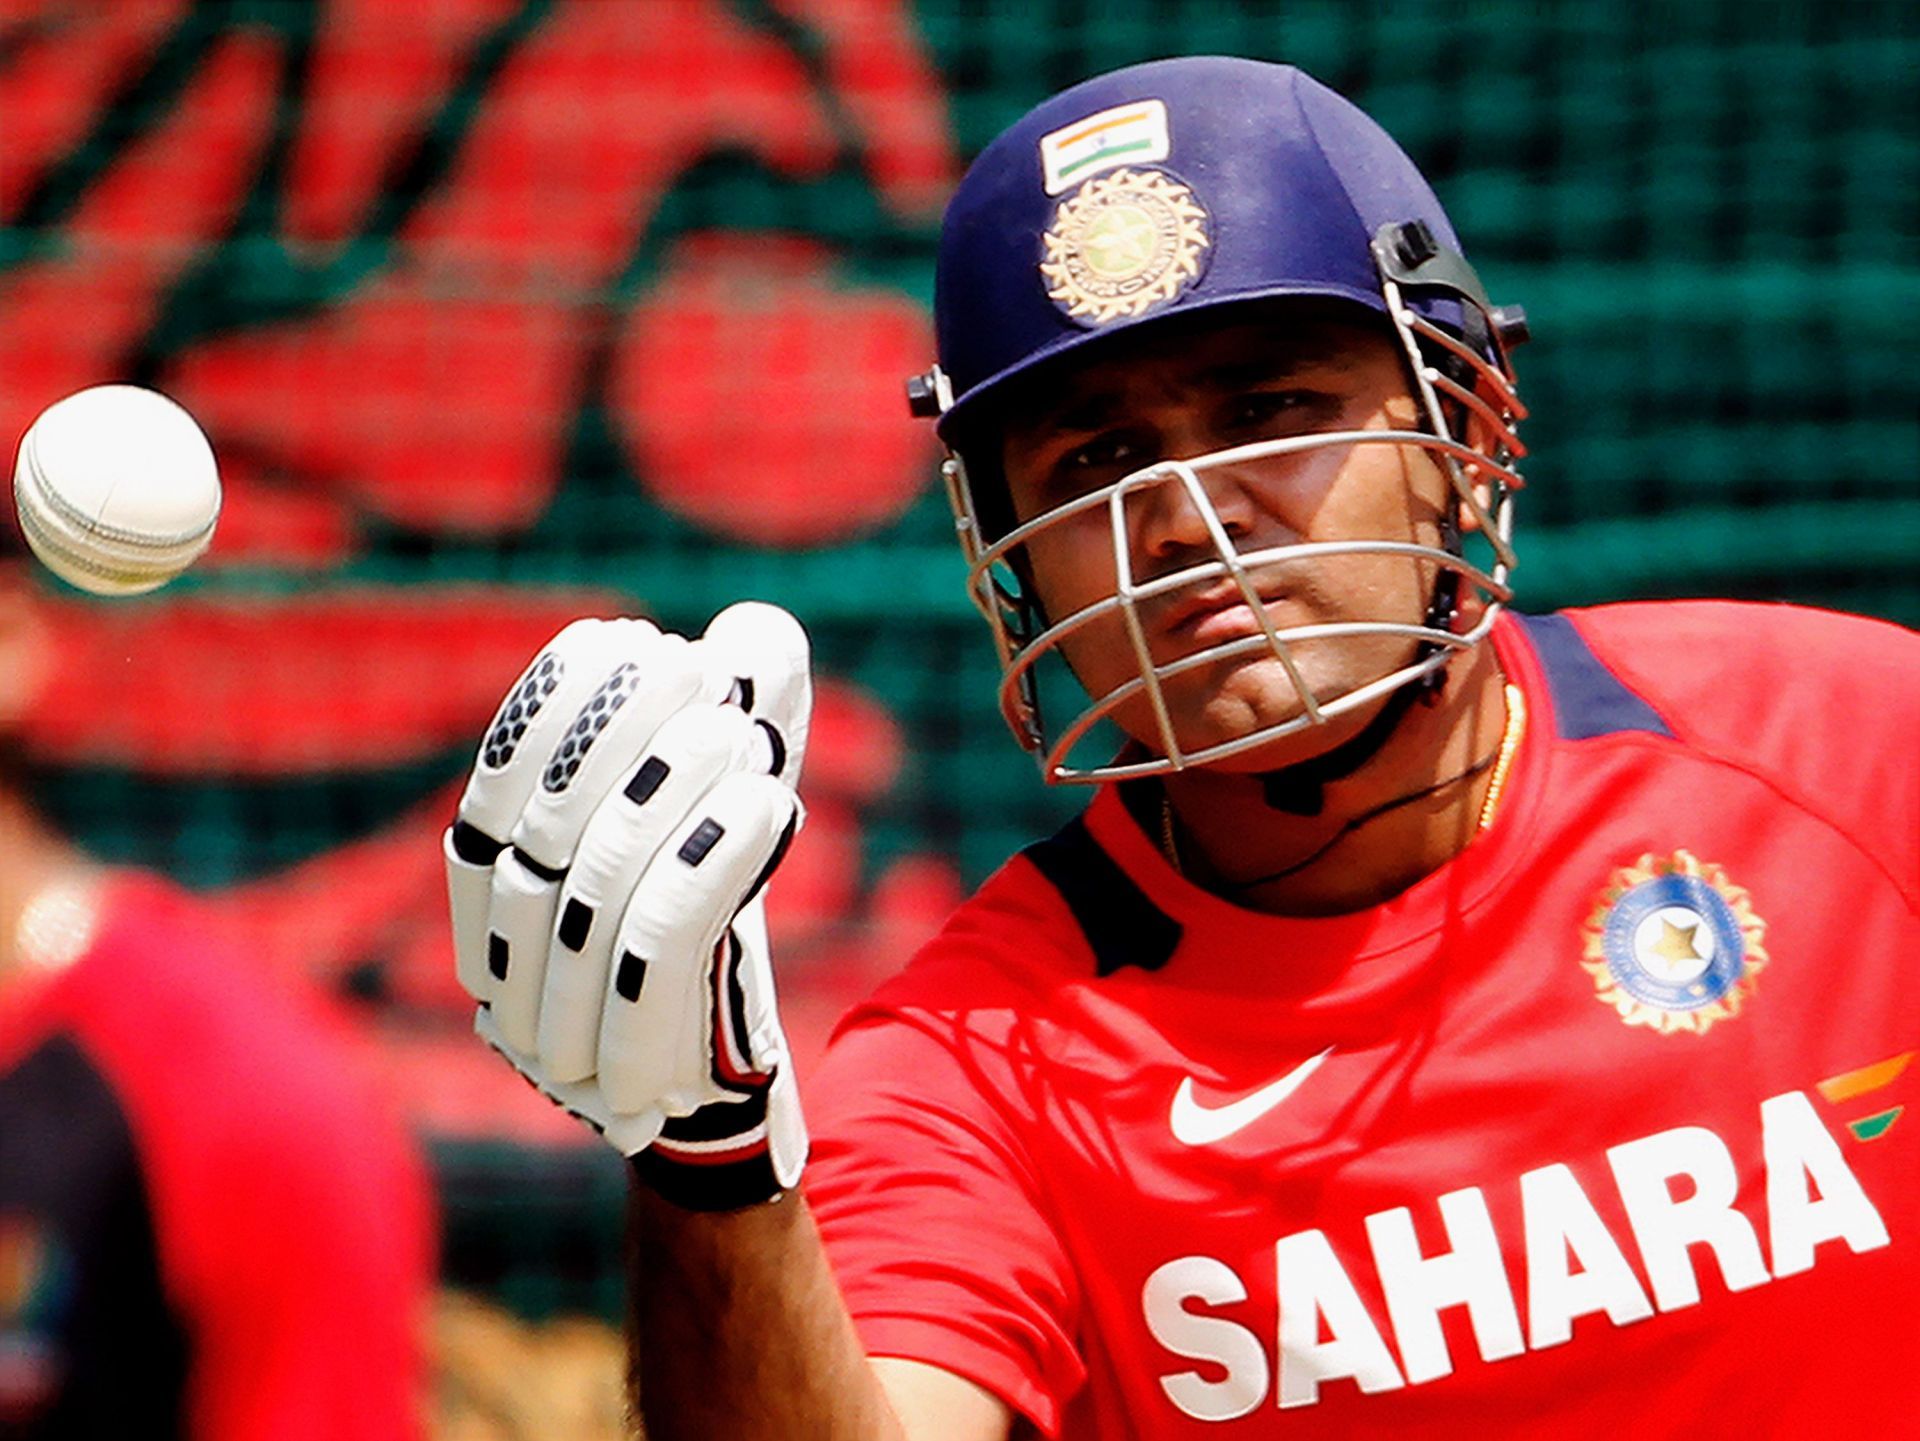 Virender Sehwag has confirmed his participation for Legends League T20 2022 (Image: Getty)